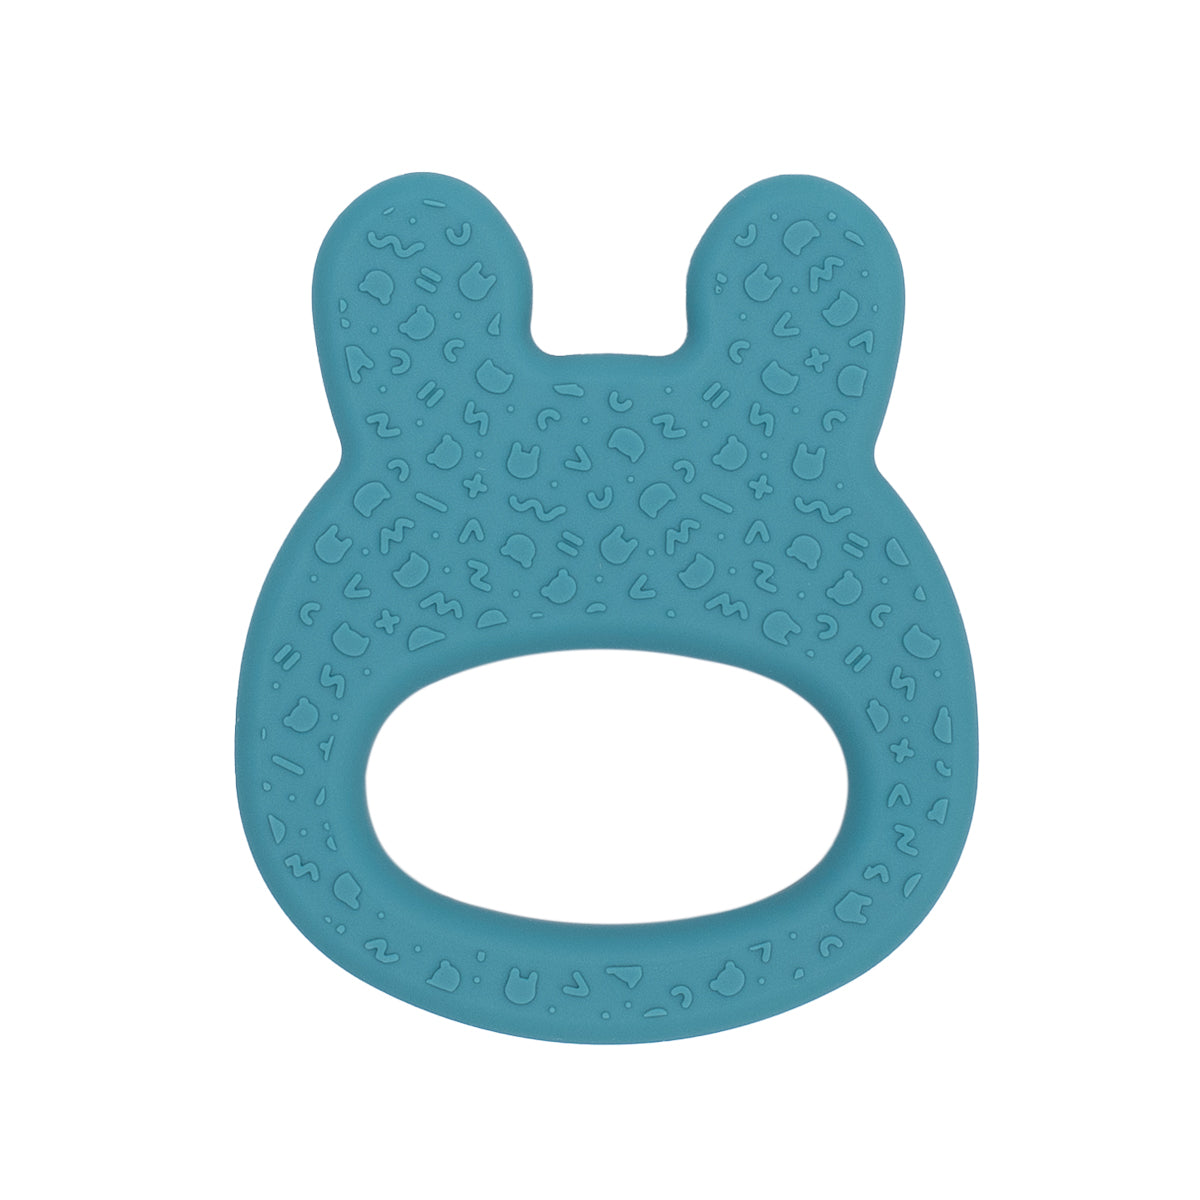 Our silicone bunny teething ring in Blue Dusk